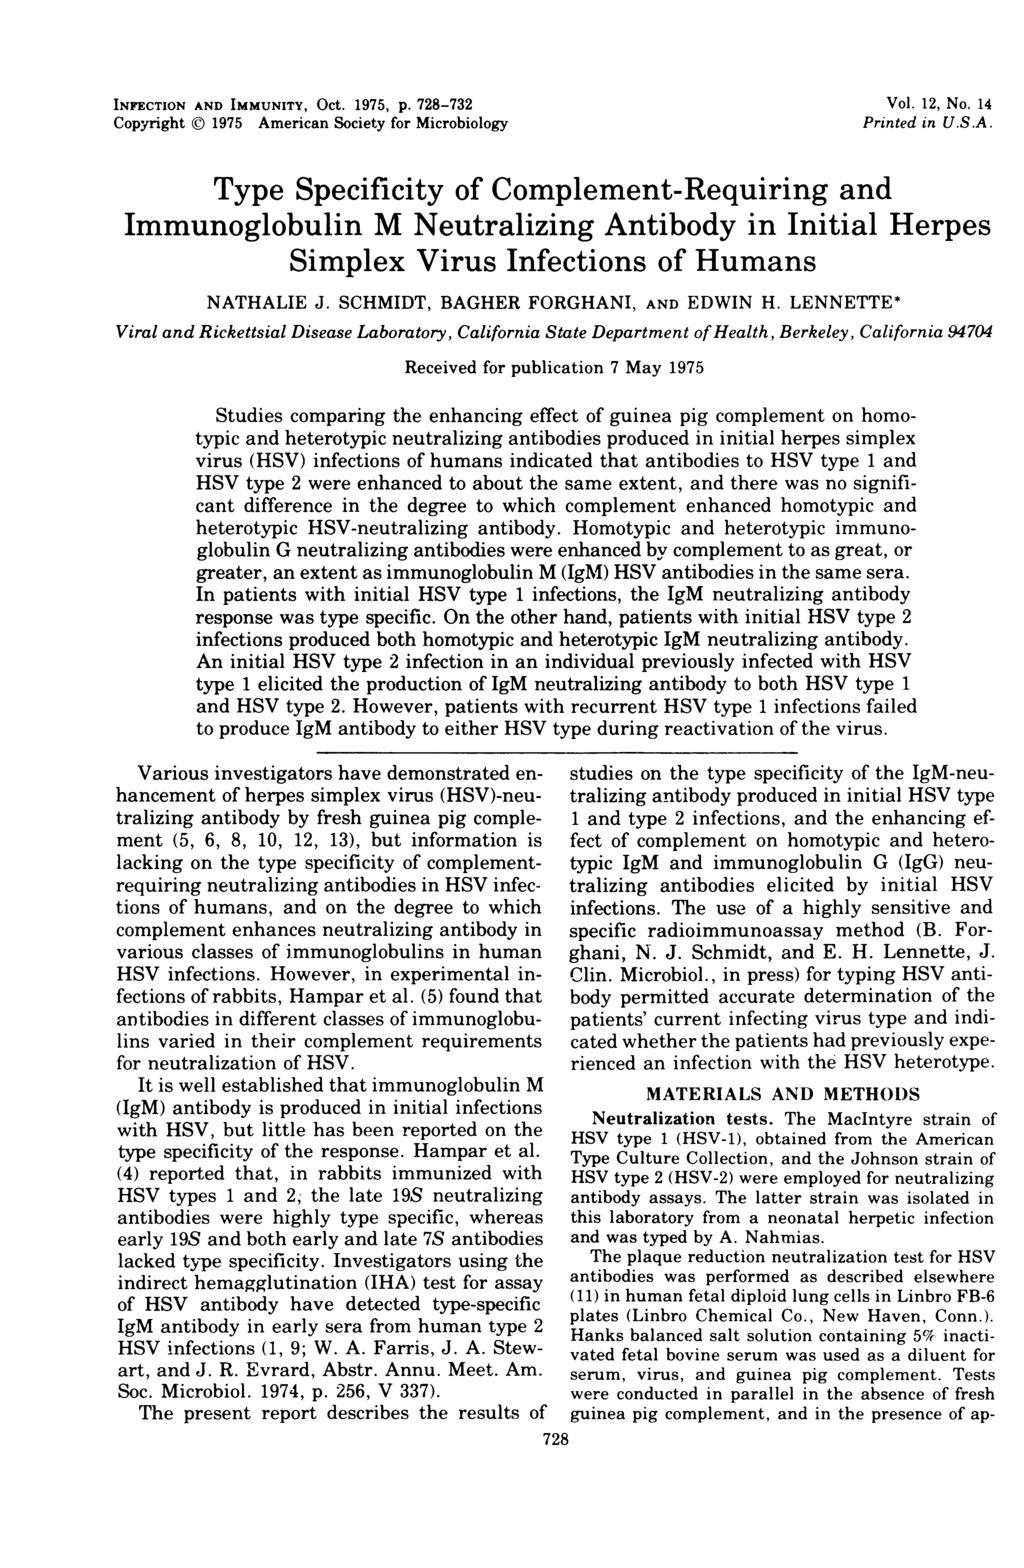 INFECTION AND IMMUNITY, OCt. 1975, p. 728-732 Copyright C) 1975 American Society for Microbiology Vol. 12, No. 14 Printed in U.S.A. Type Specificity of Complement-Requiring and Immunoglobulin M Neutralizing Antibody in Initial Herpes Simplex Virus Infections of Humans NATHALIE J.